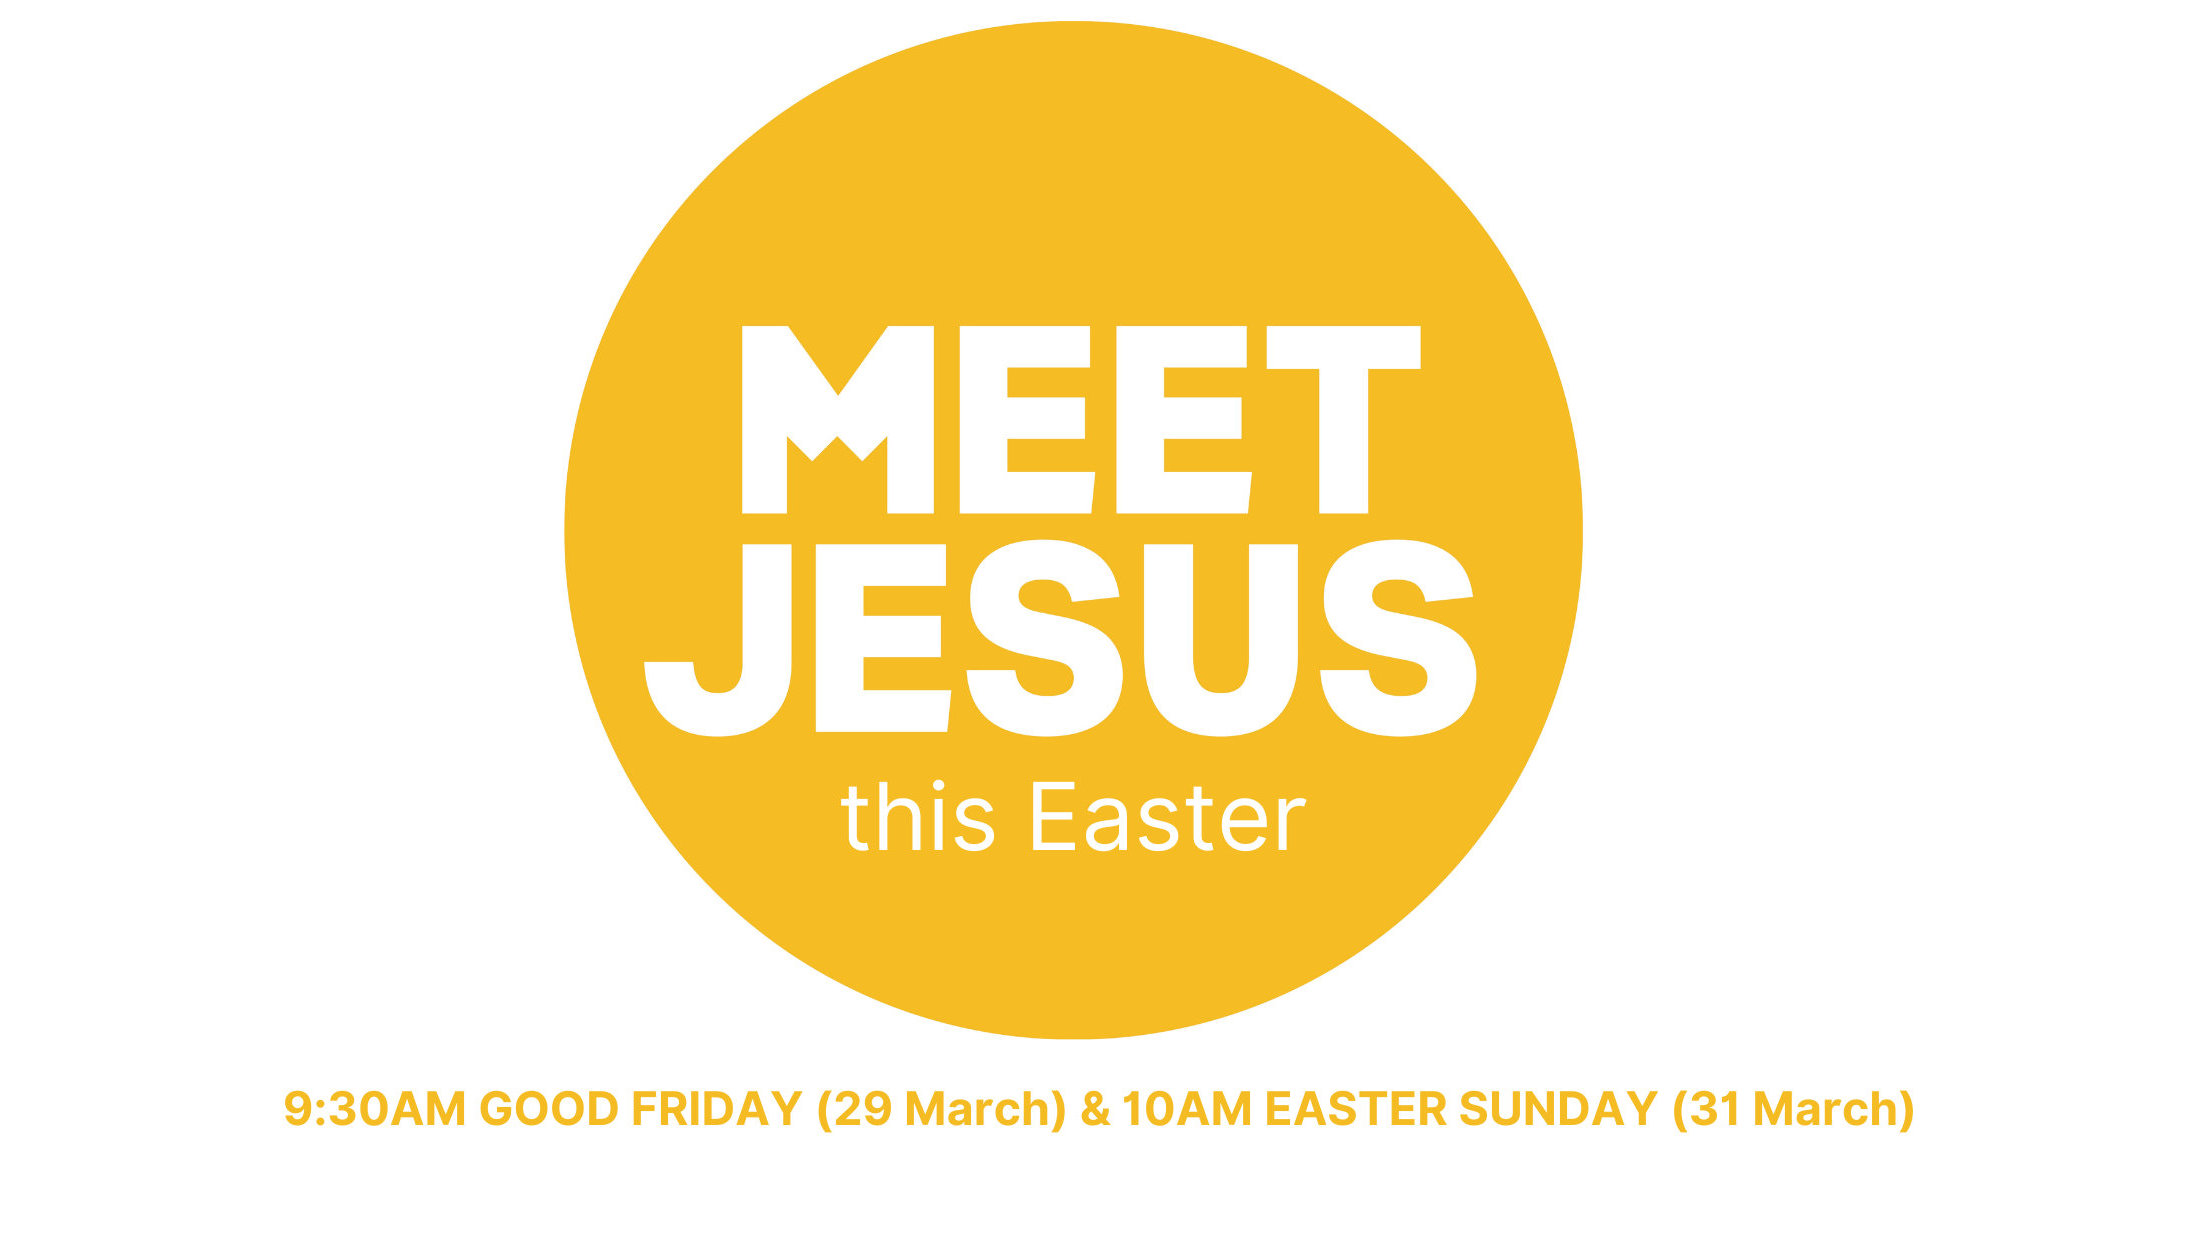 Meet Jesus this Easter. 9:30am Good Friday (29th March) & 10am Easter Sunday (31st March).